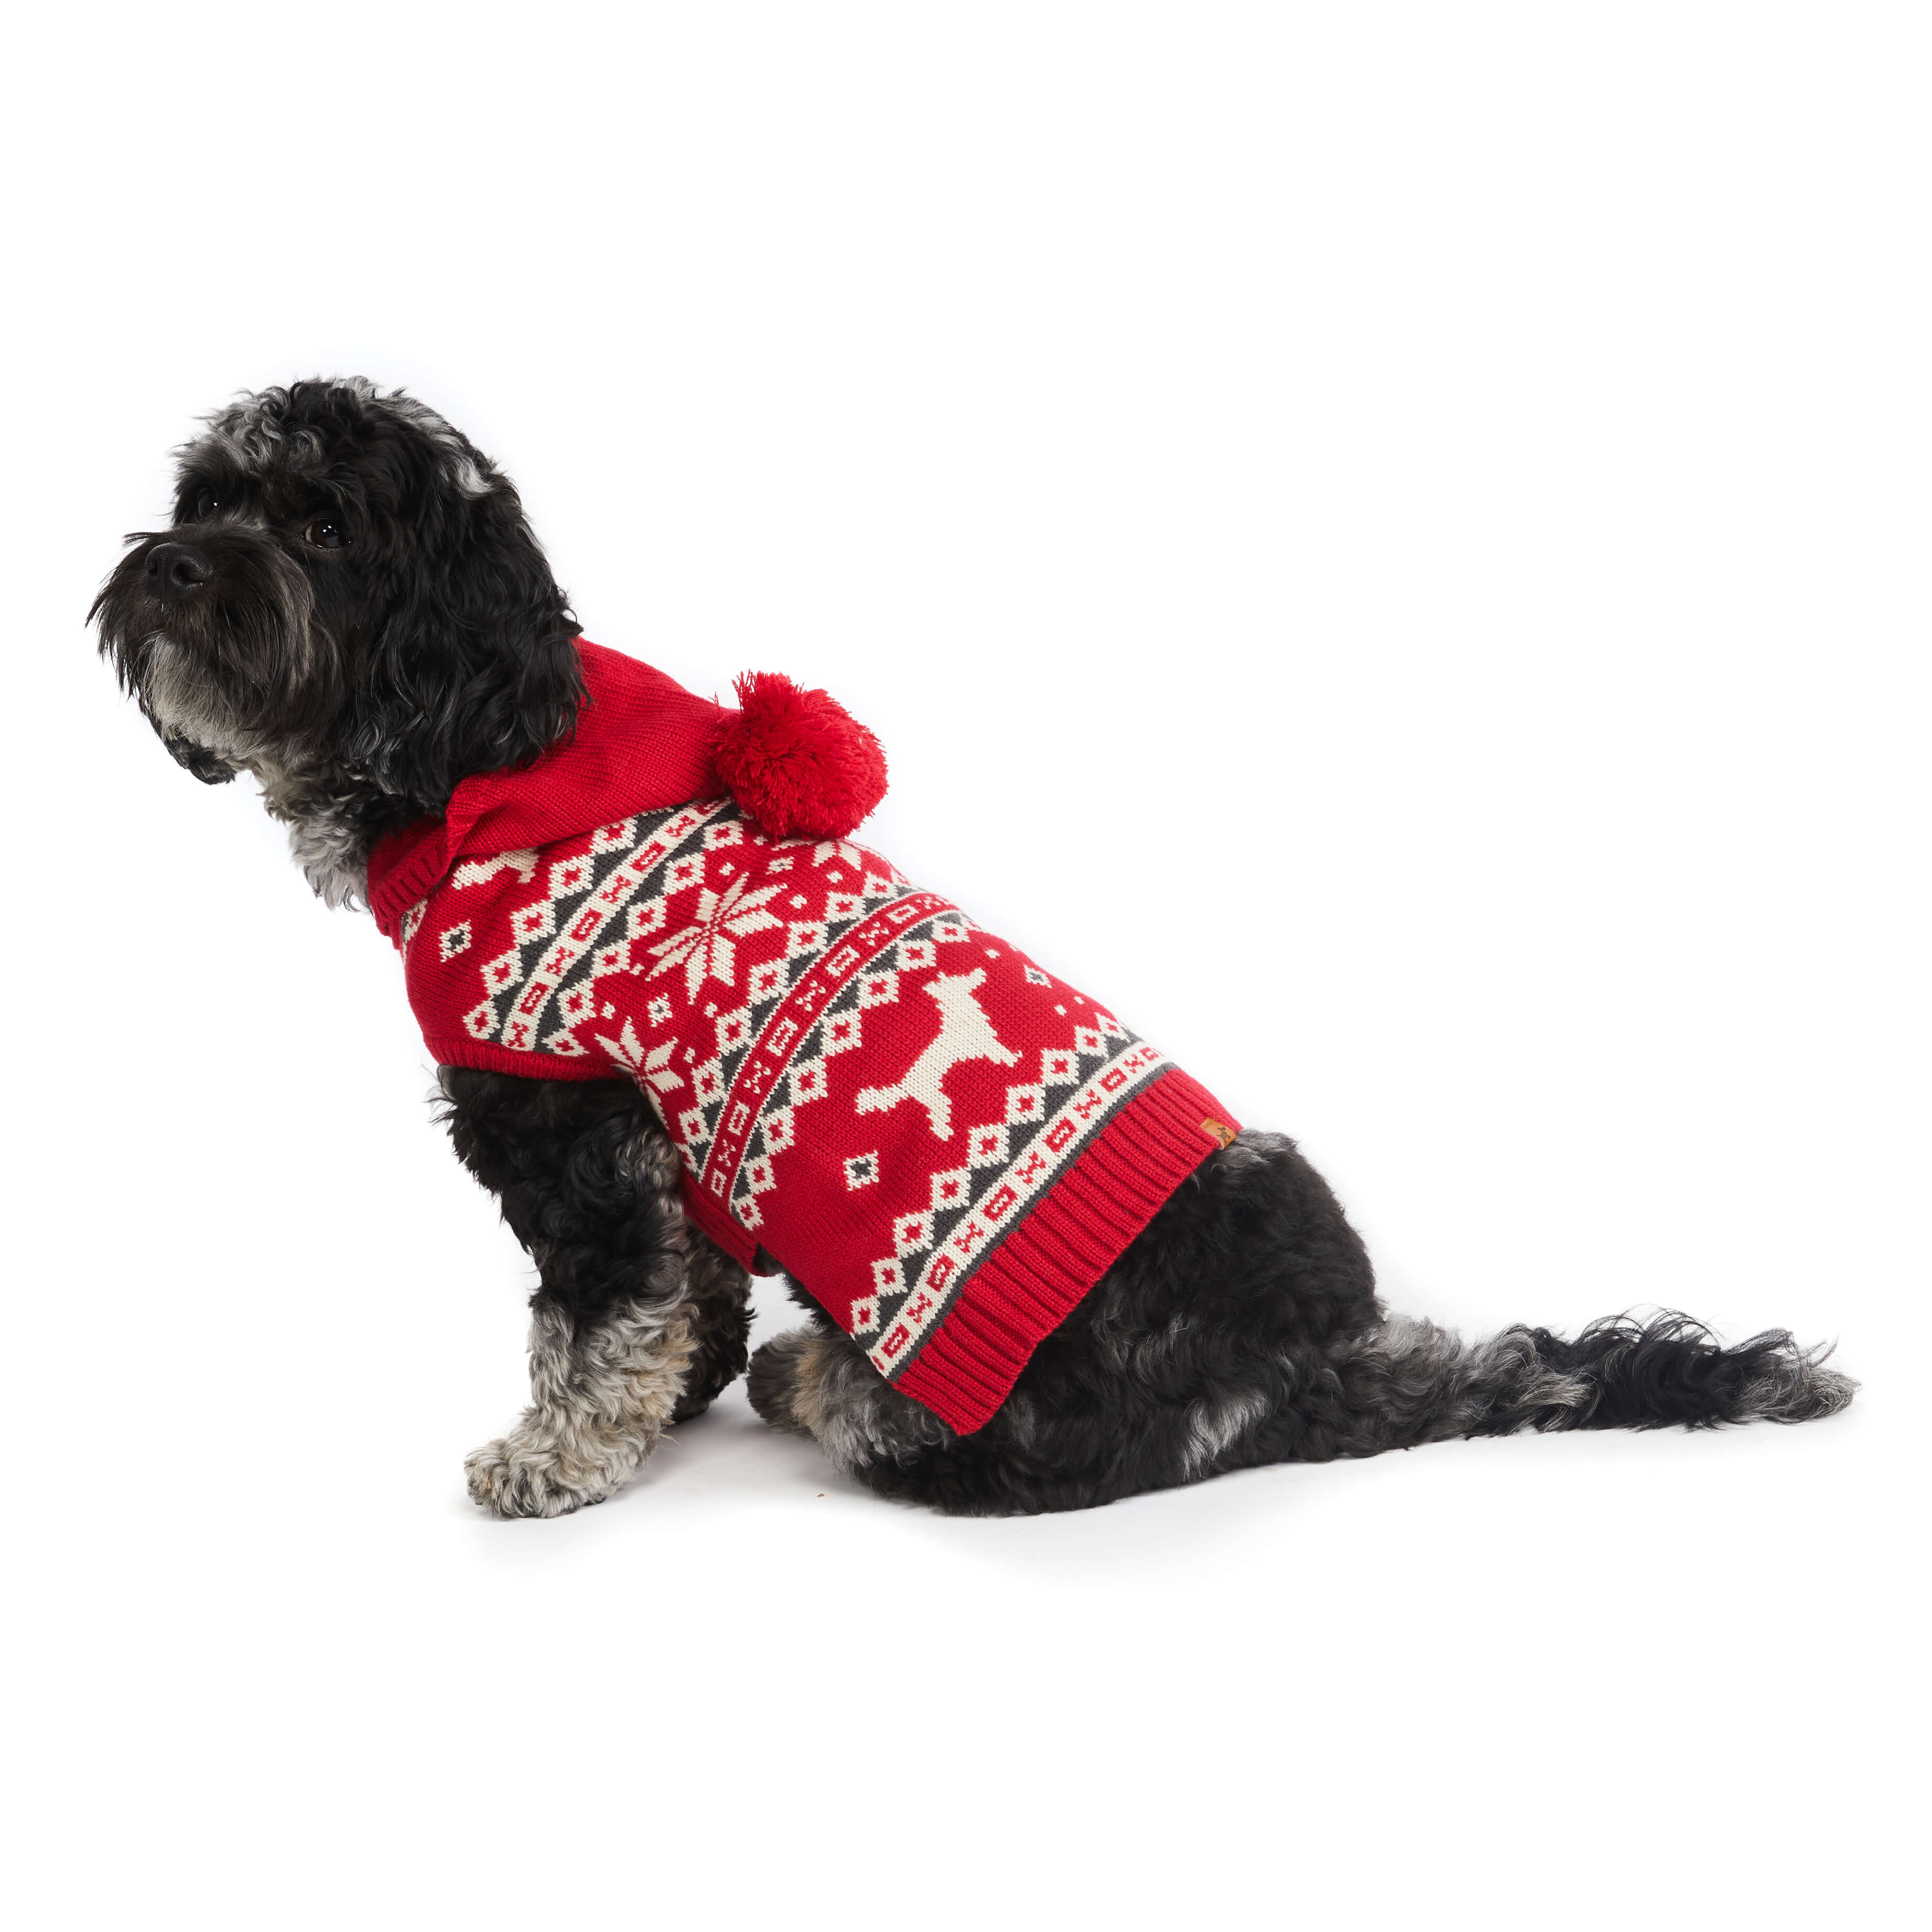 Dog wearing festive red sweater. Side view